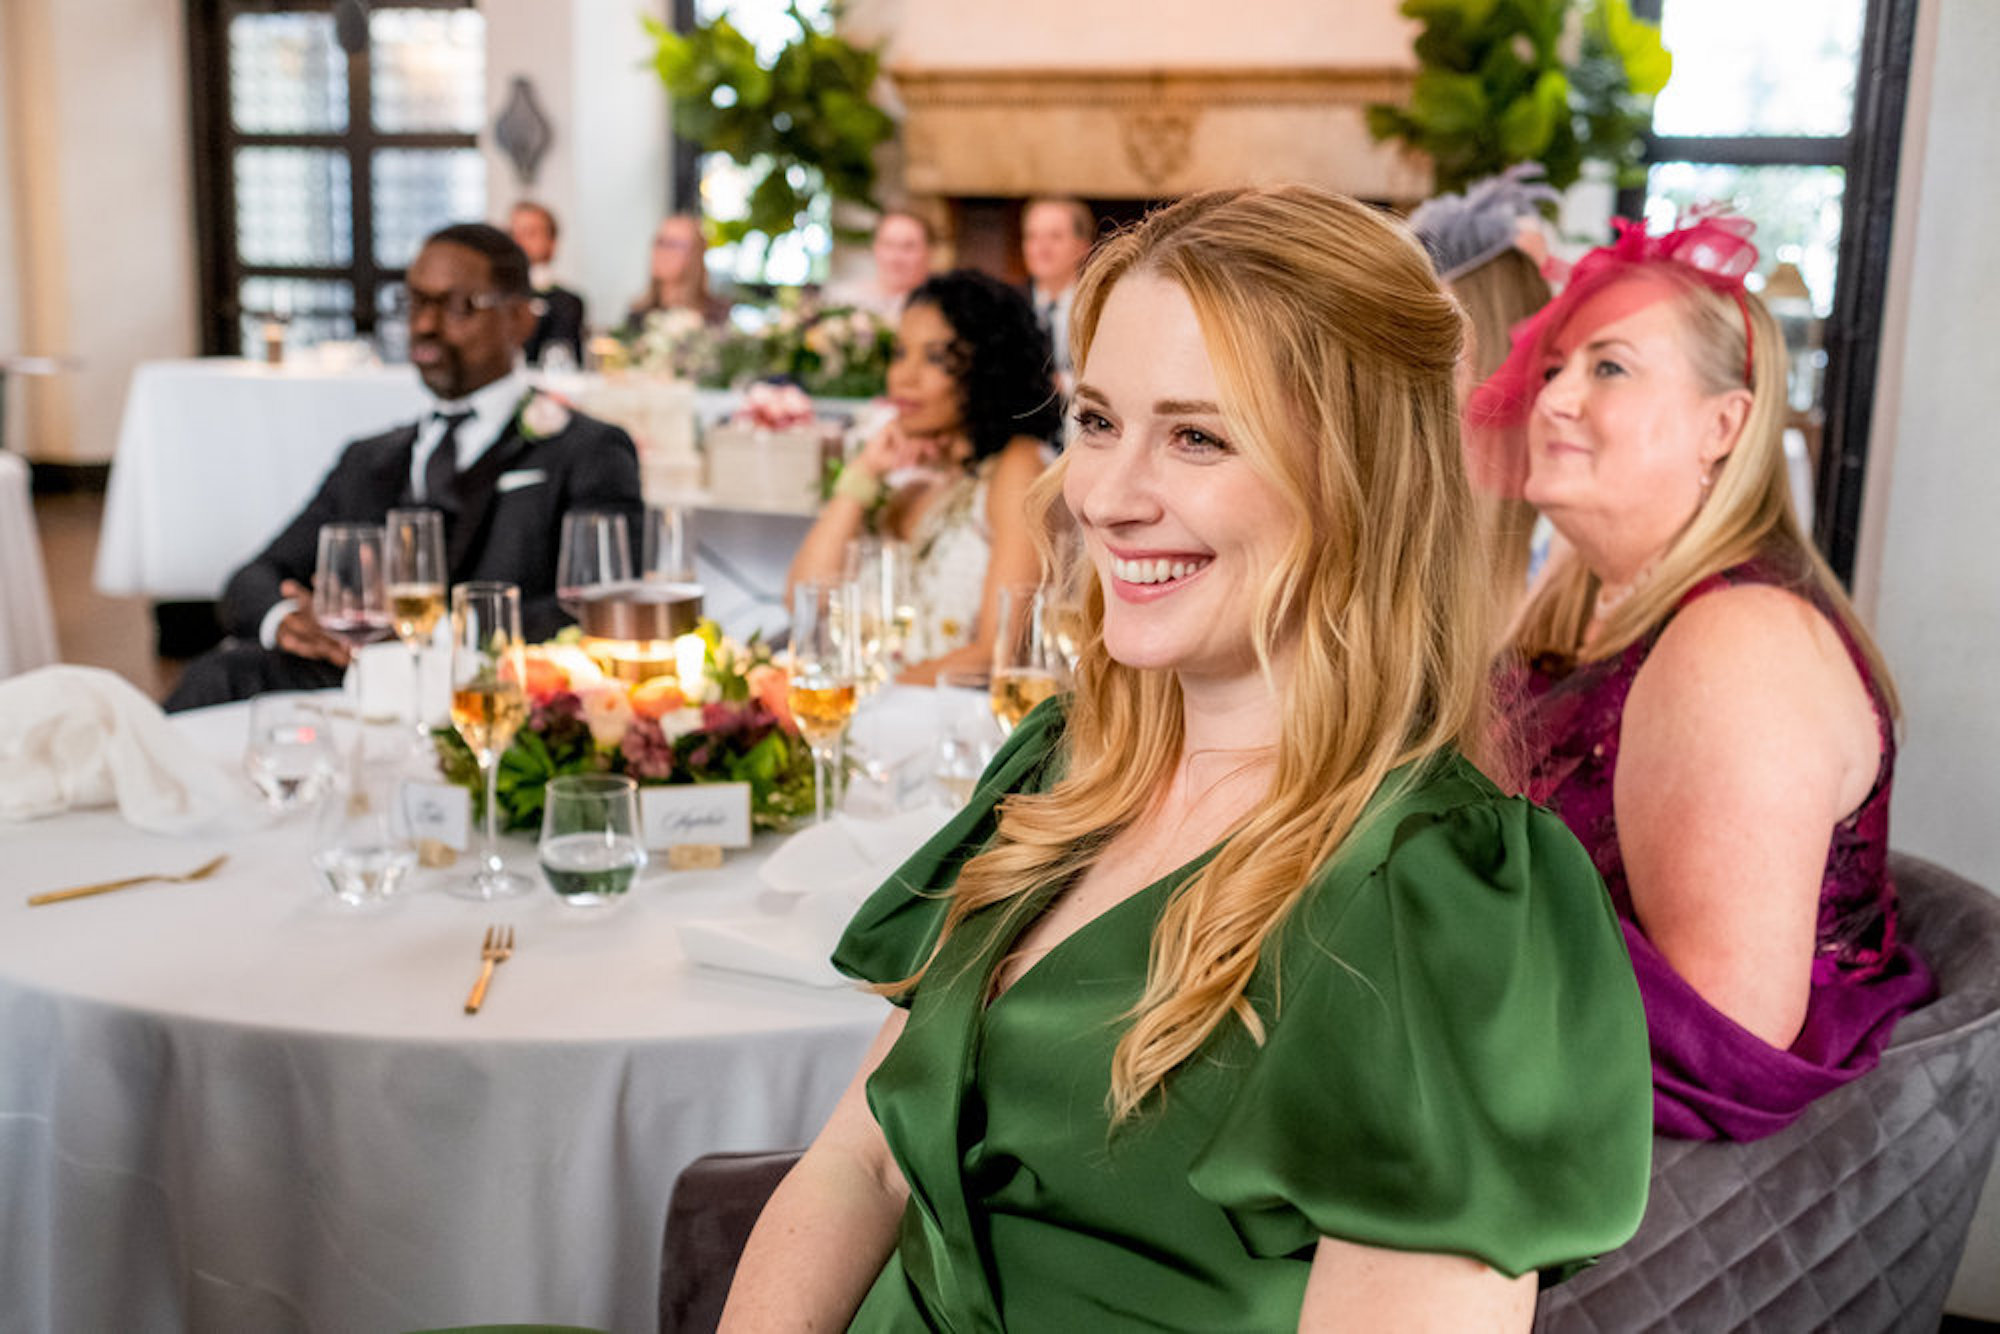 Sophie smiling and wearing a green dress at Kate's wedding in 'This Is Us' Season 6 Episode 13